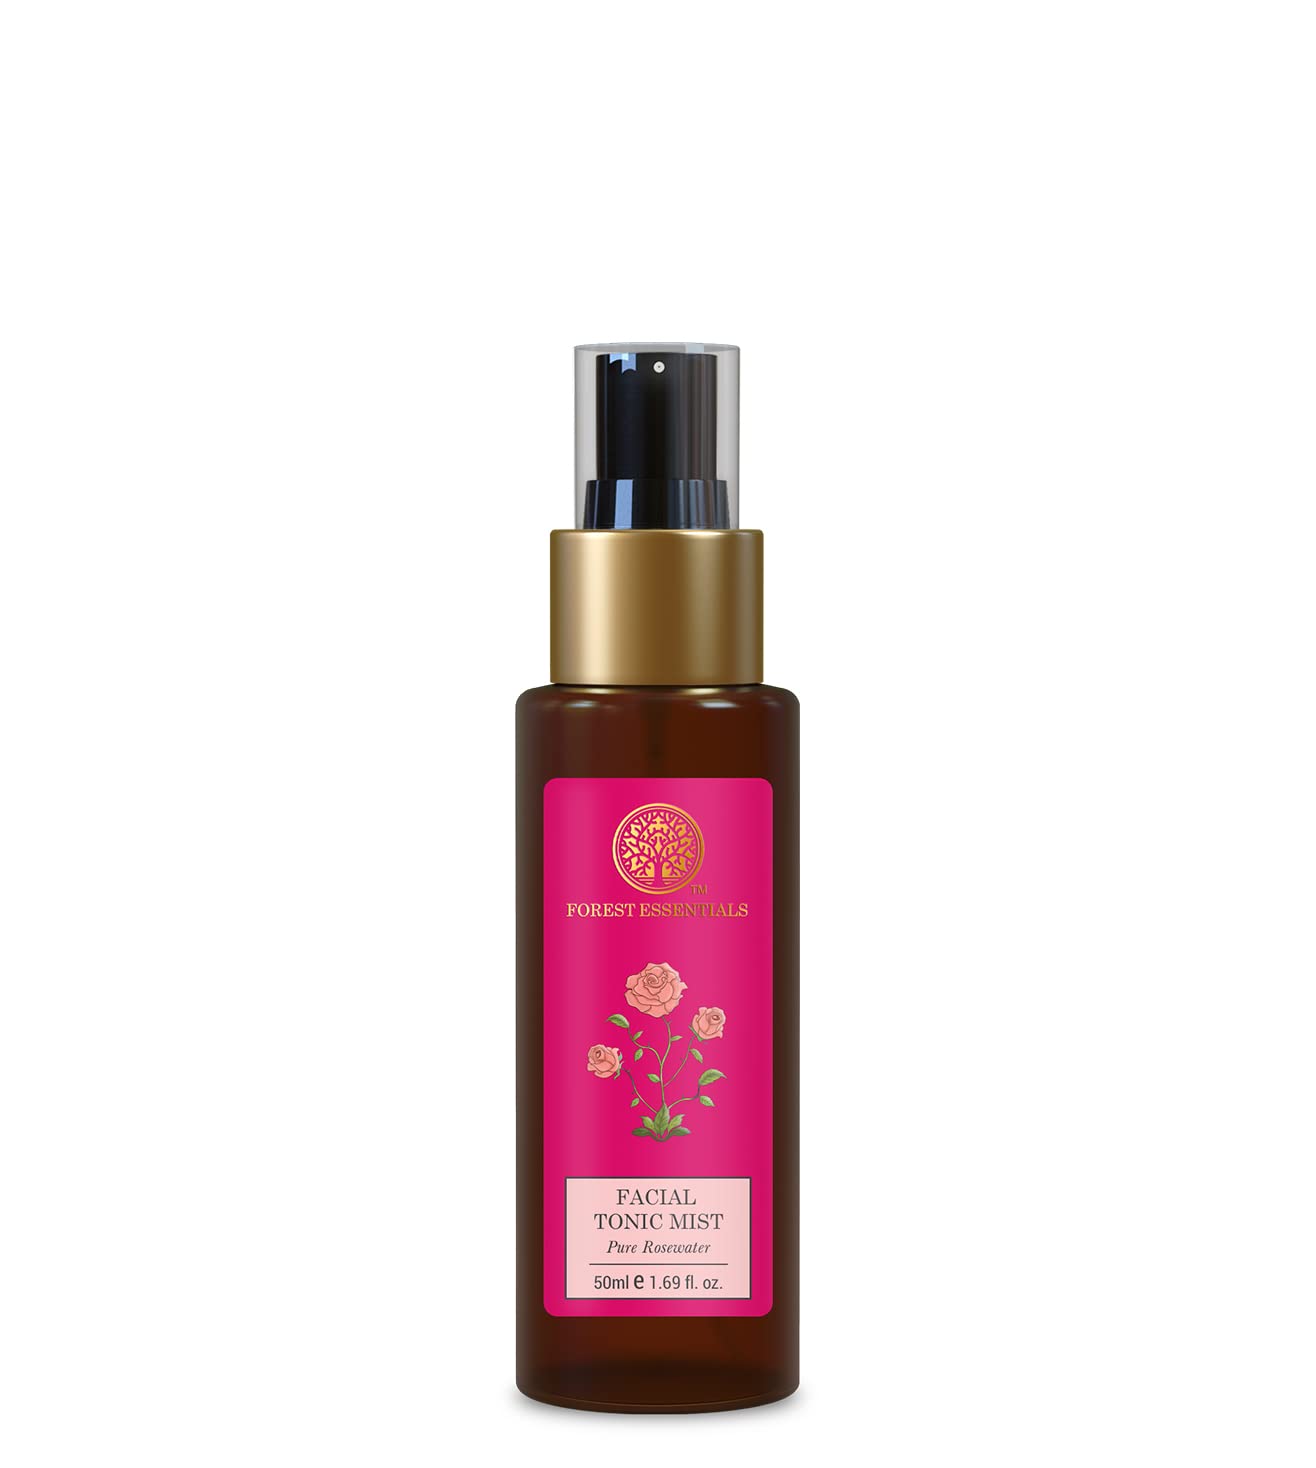 Forest Essentials Facial Tonic Mist Pure Rosewater - 50 ml